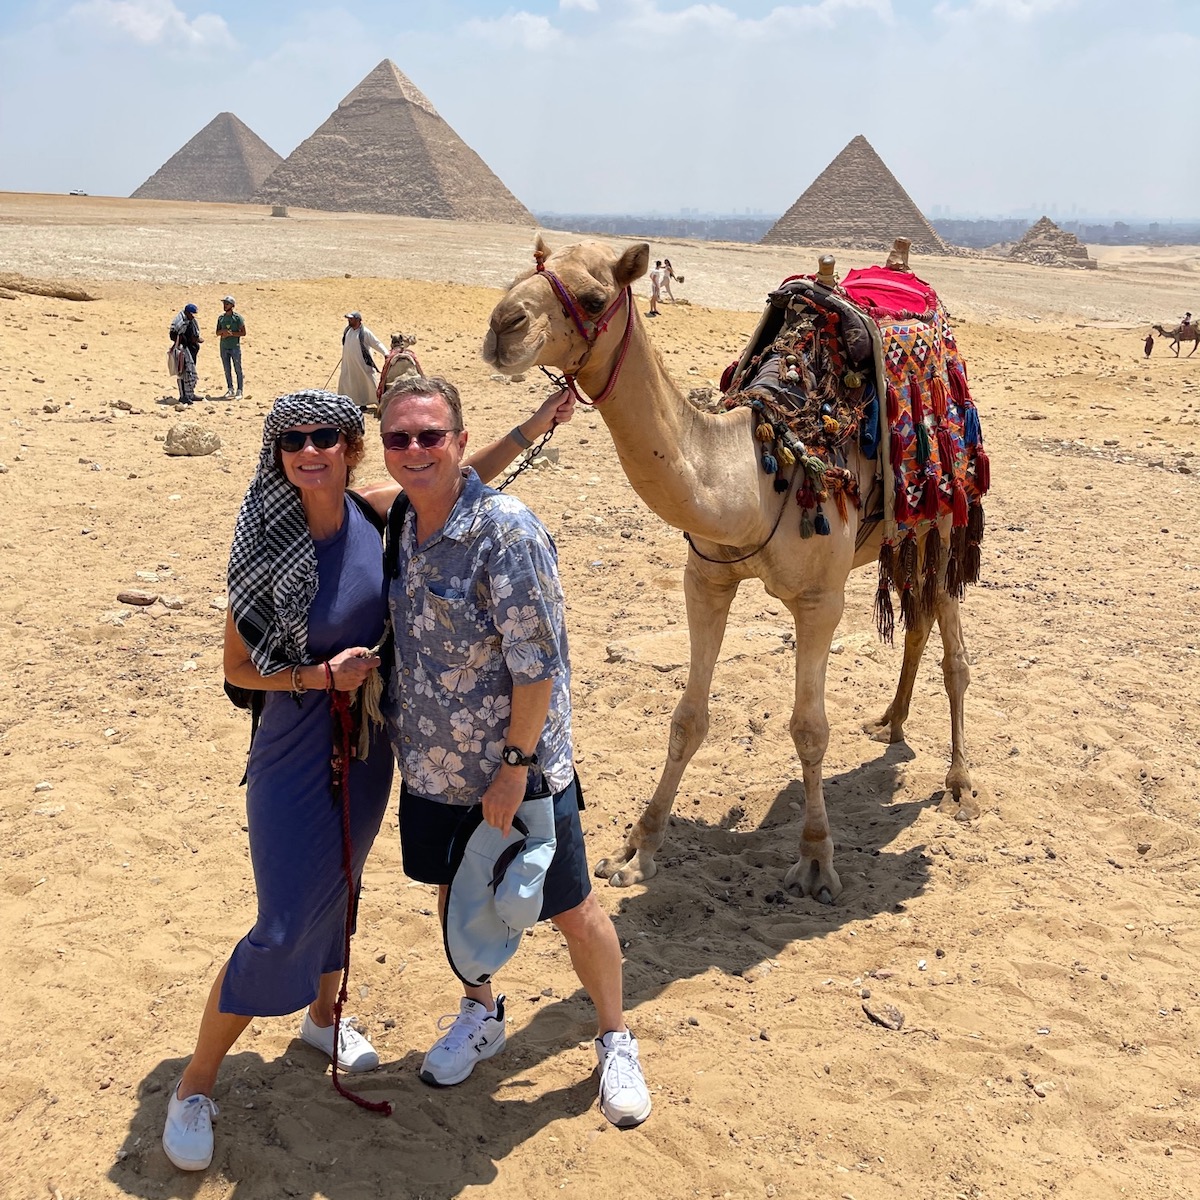 The author with her husband at the Pyramids of Cairo, Egypt